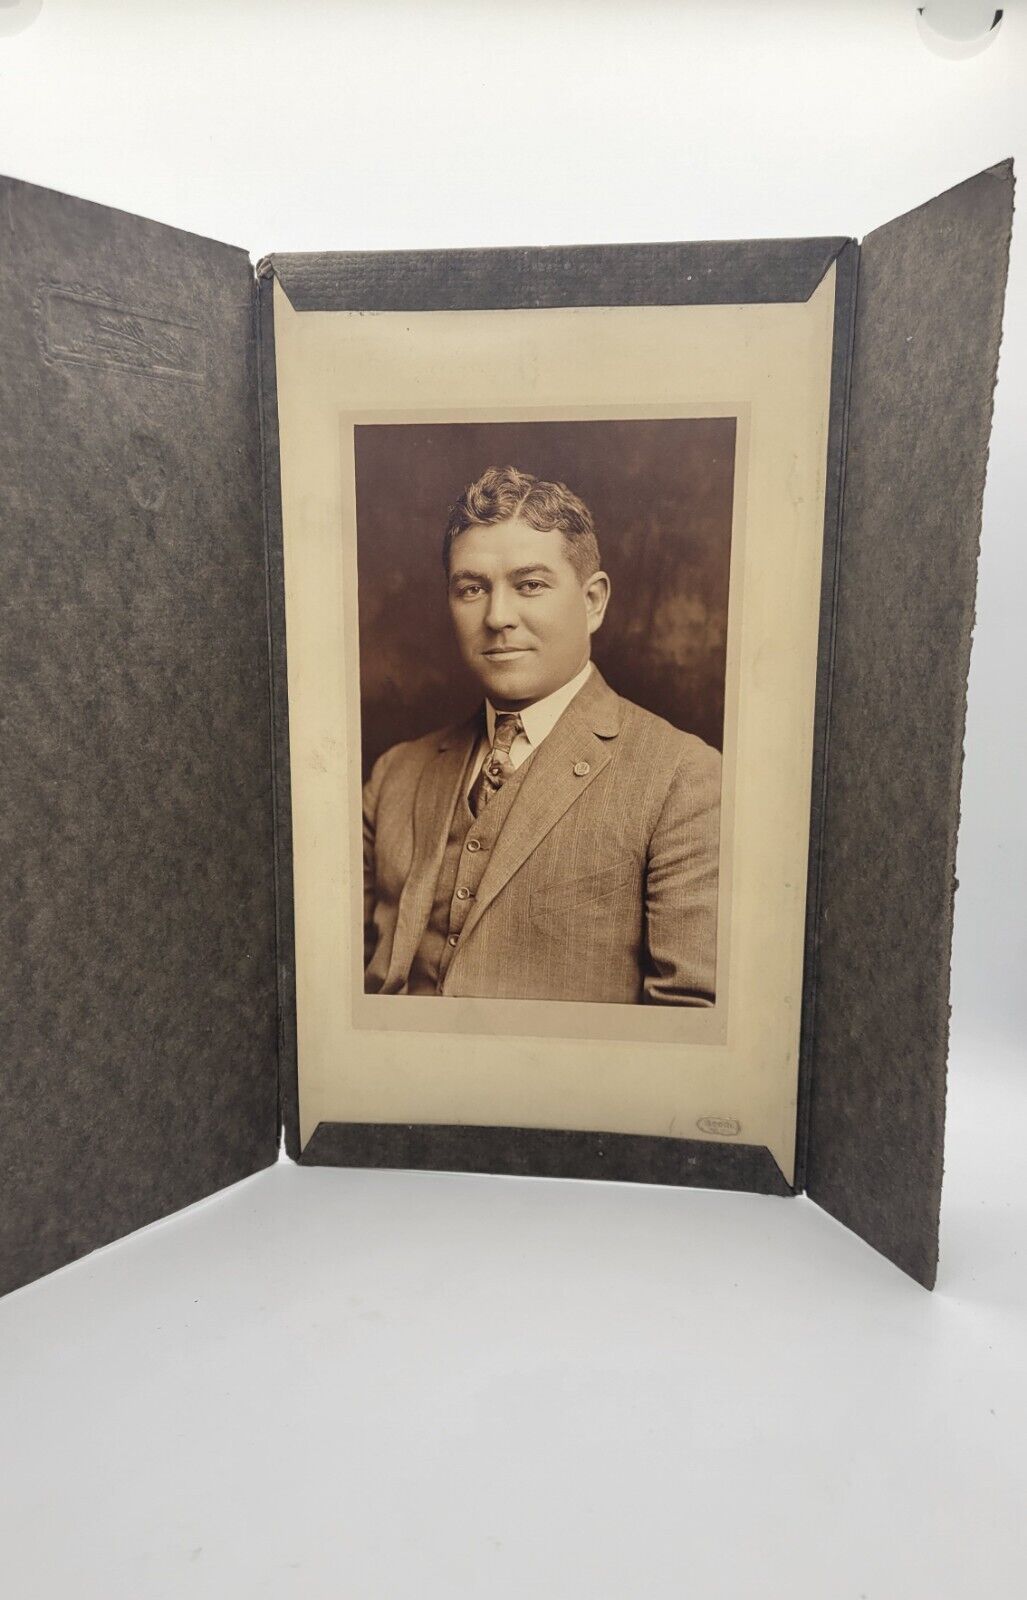 Antique Photo 1919 Kansas City Photograph By Henry Moore Cabinet Card 105 Yr Old